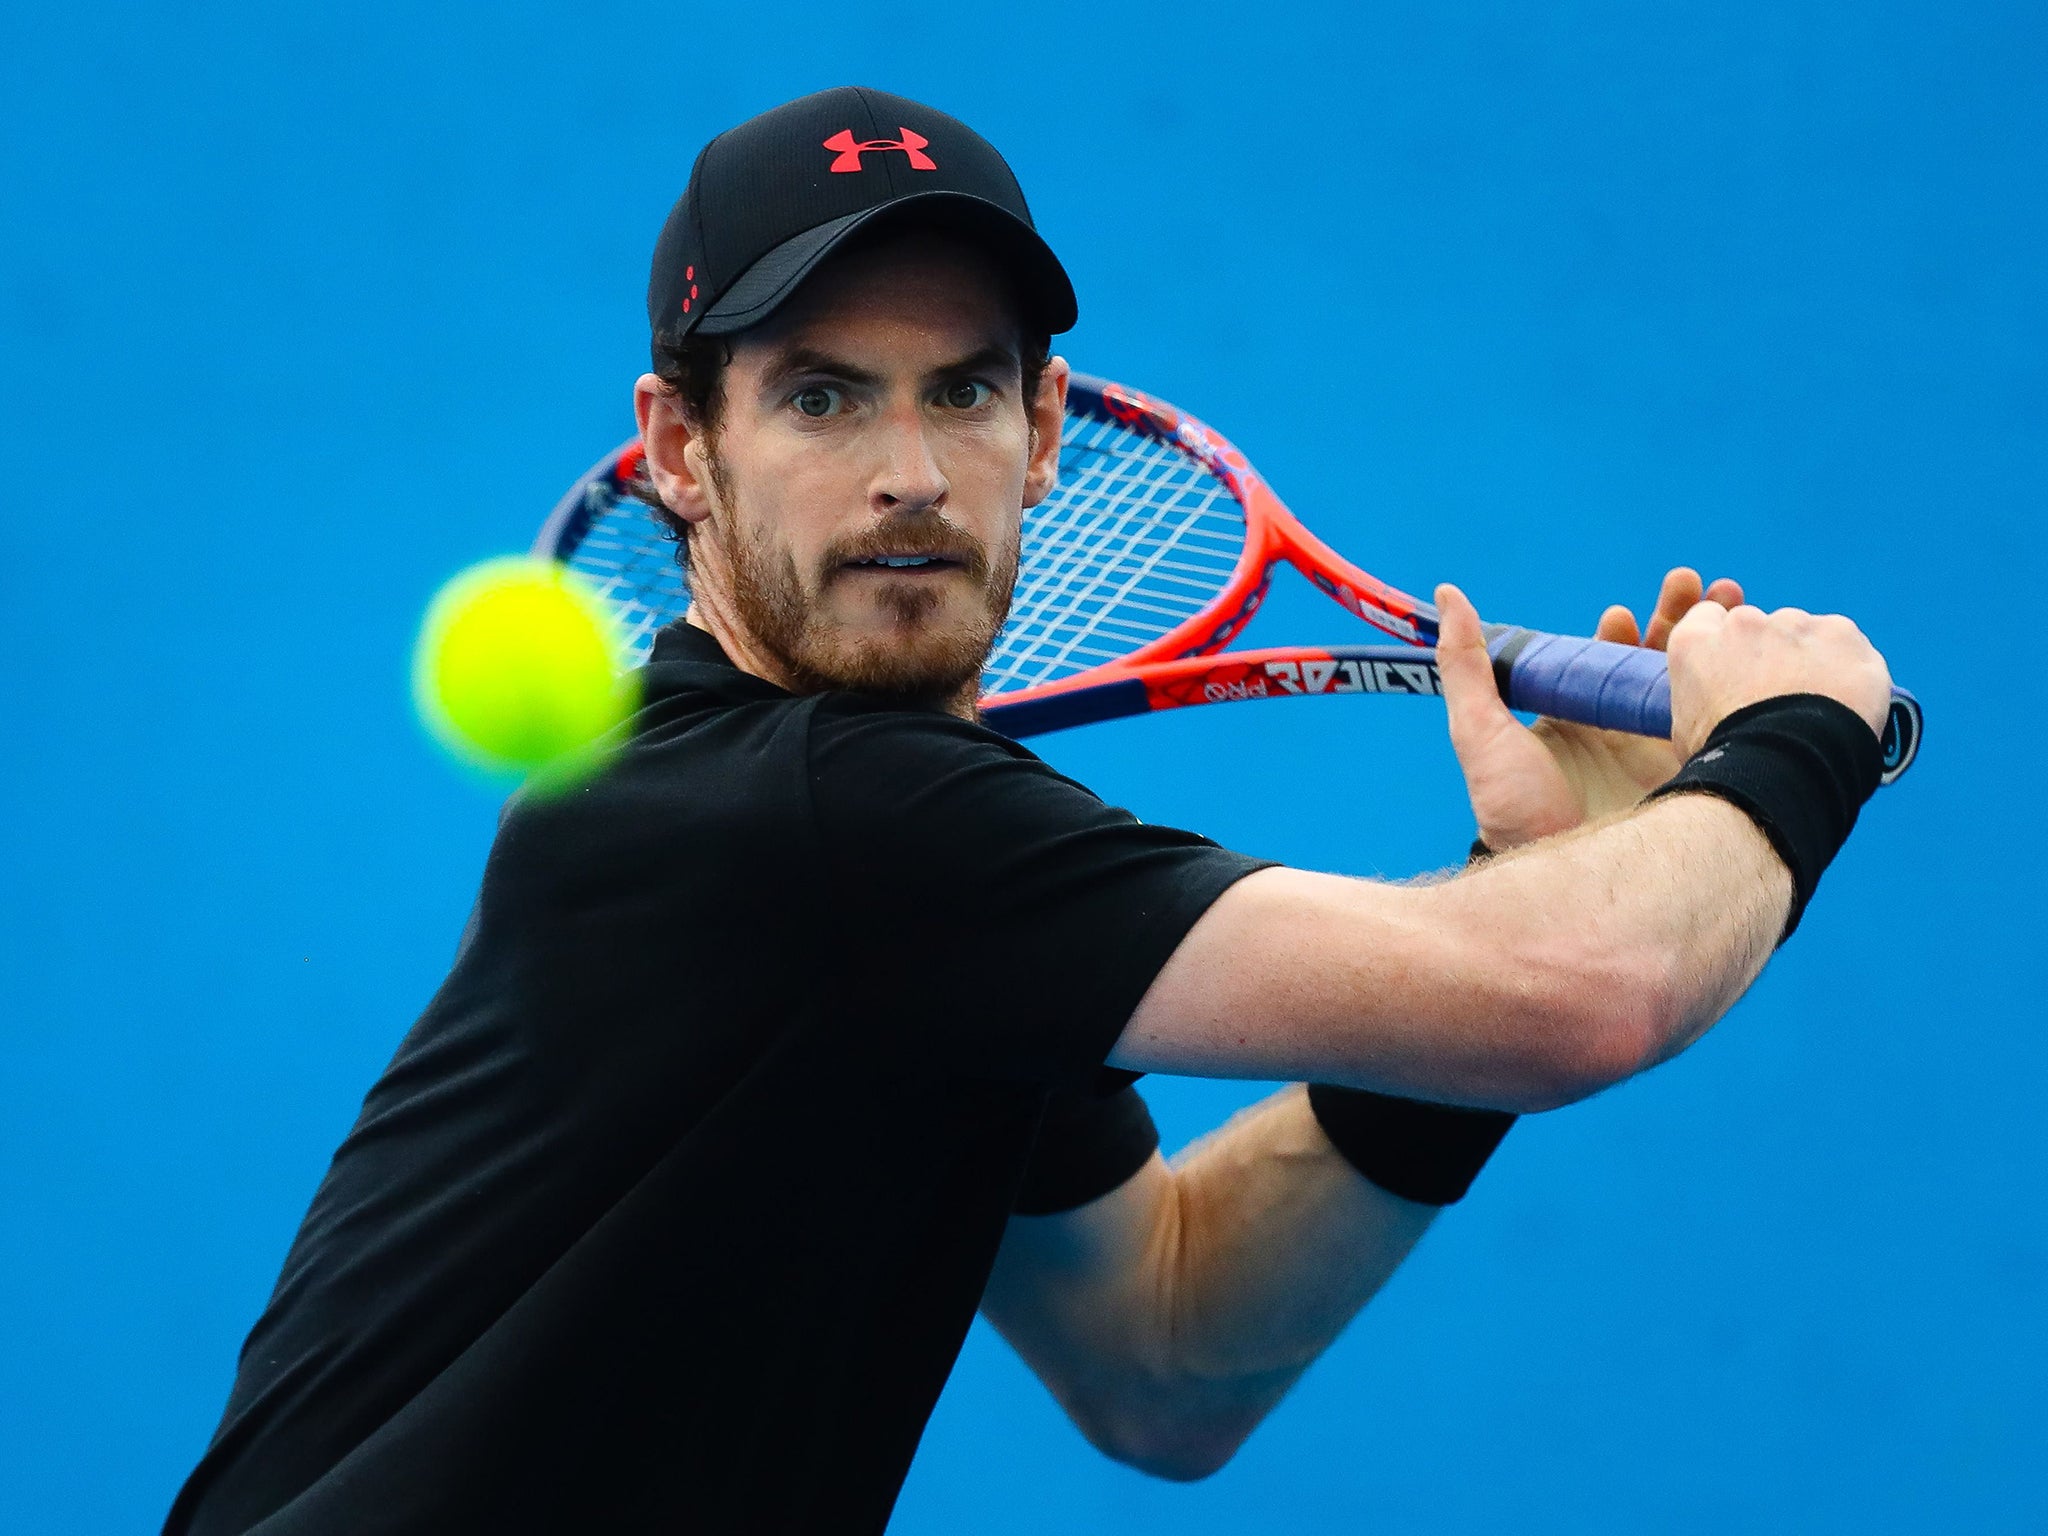 Andy Murray says his rehabilitation is going well